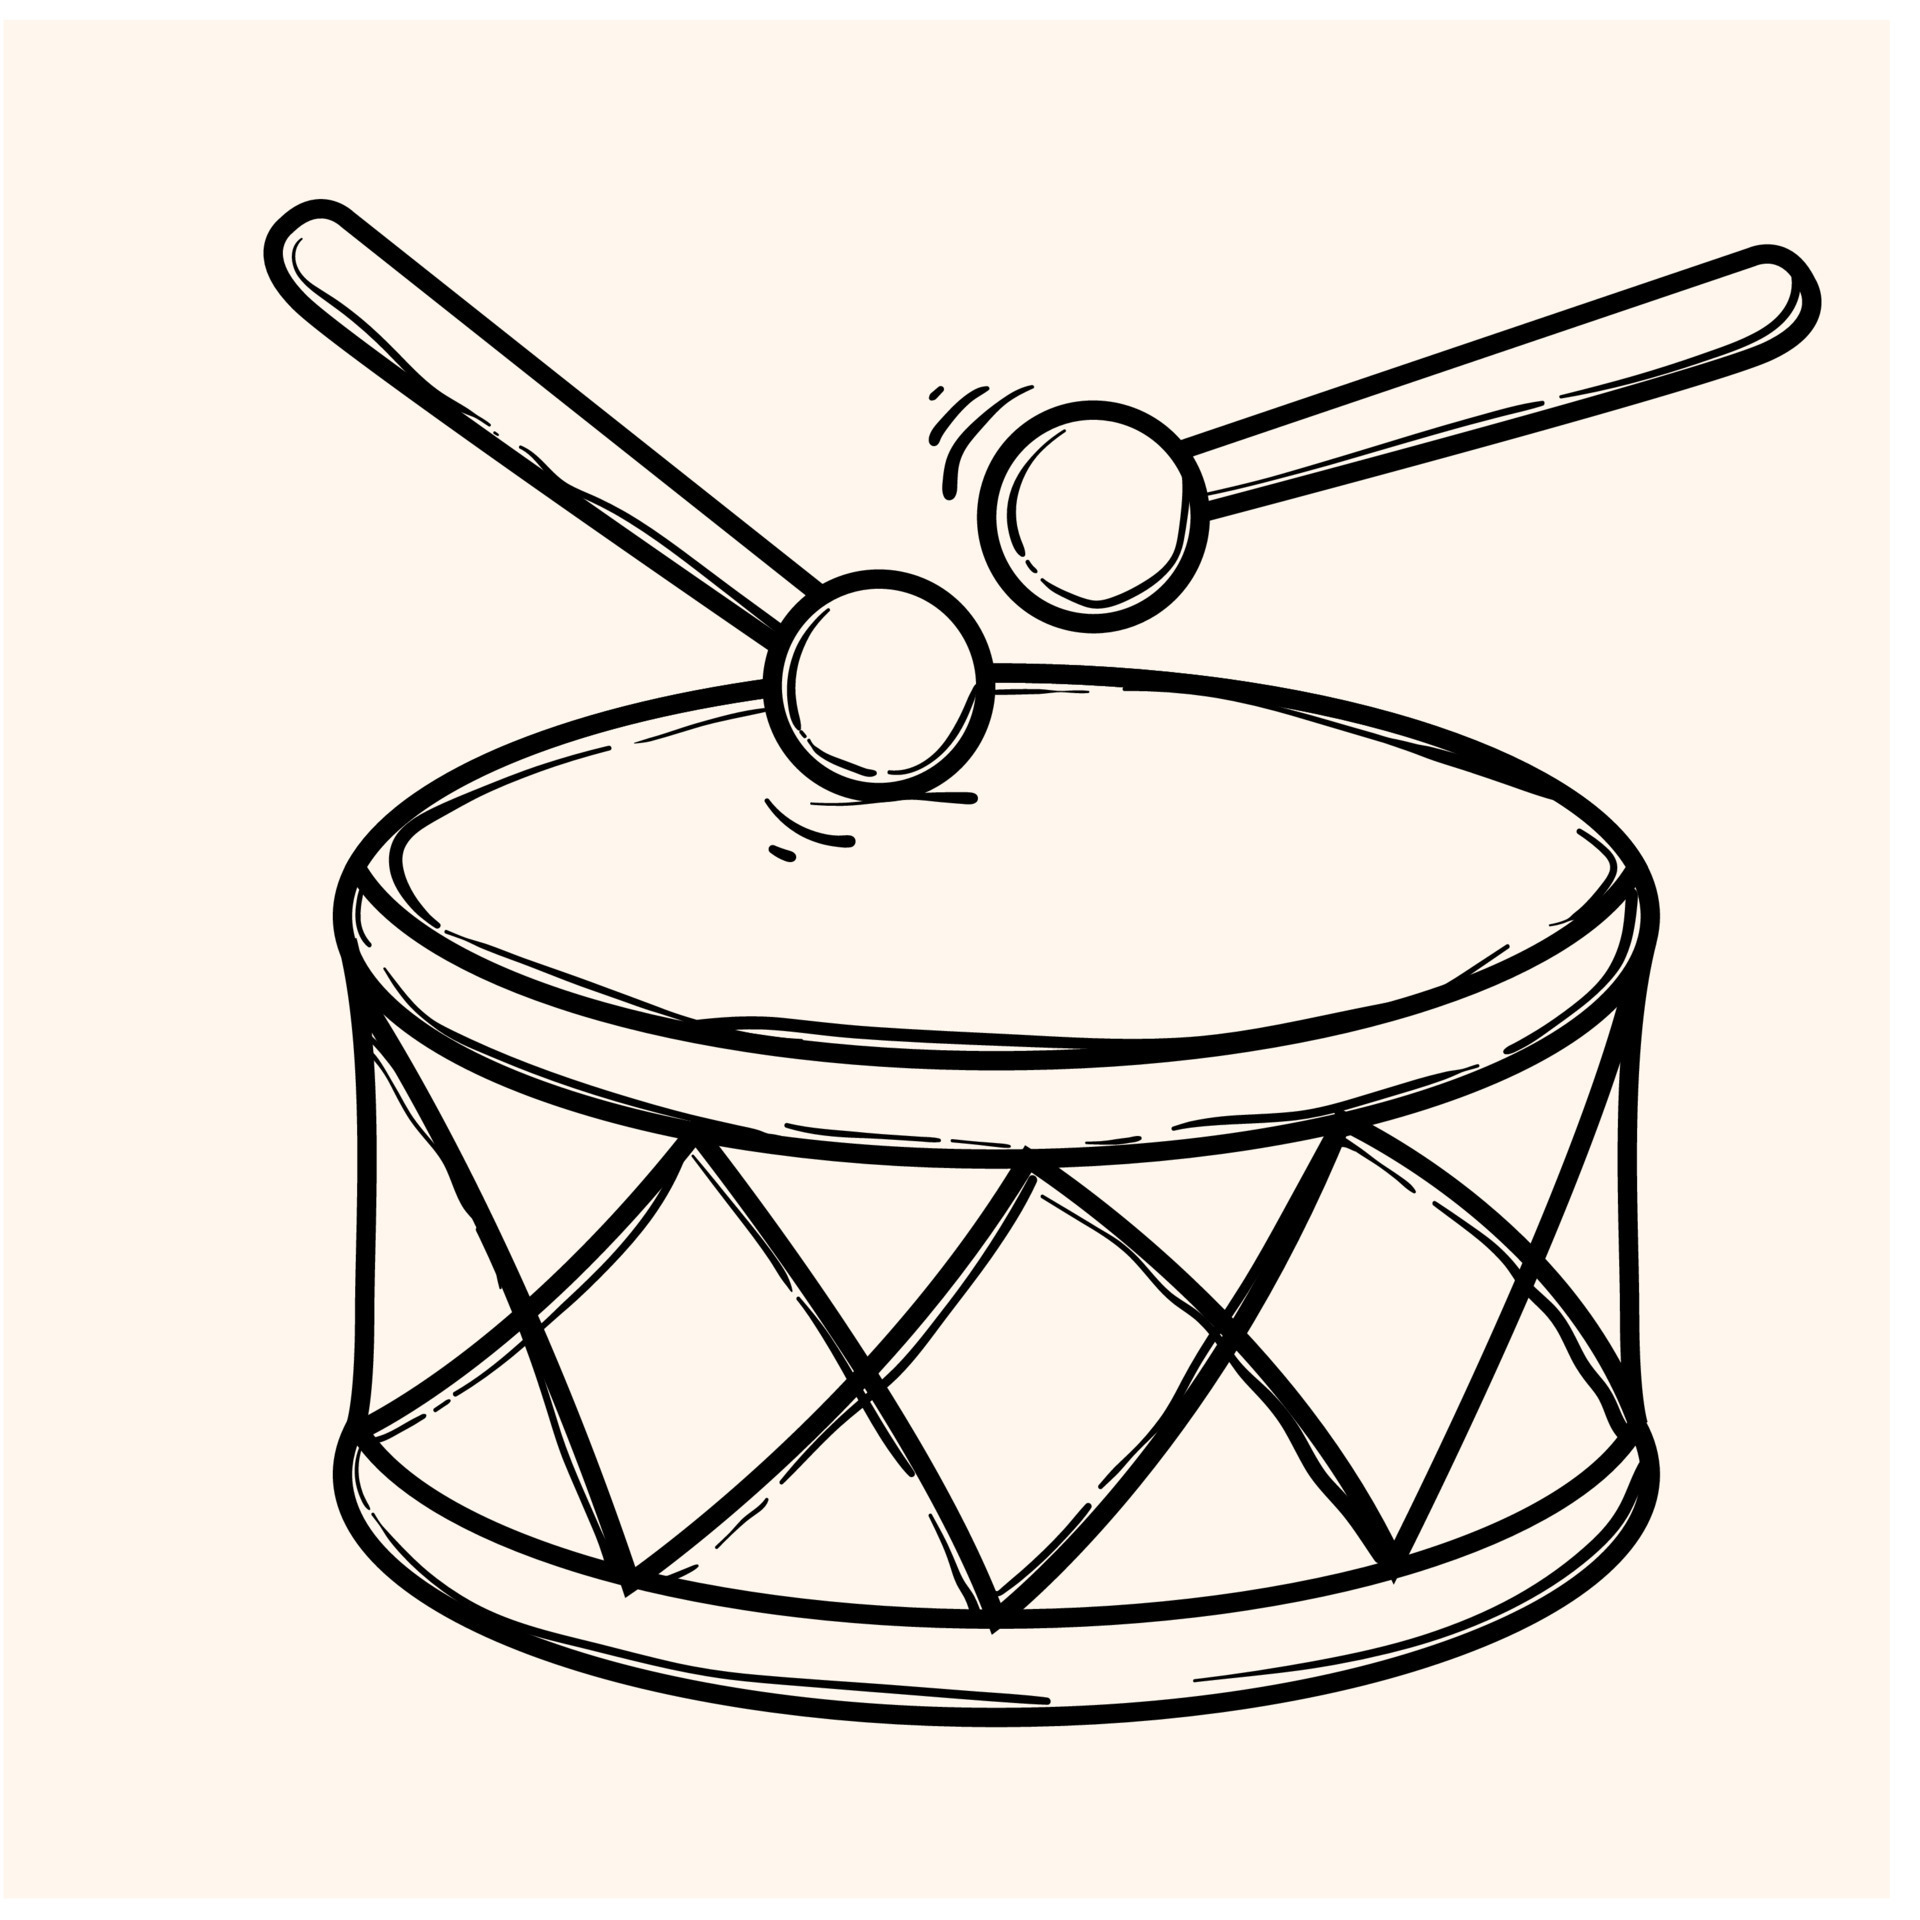 8,620 Drum Set Drawing Images, Stock Photos, 3D objects, & Vectors |  Shutterstock